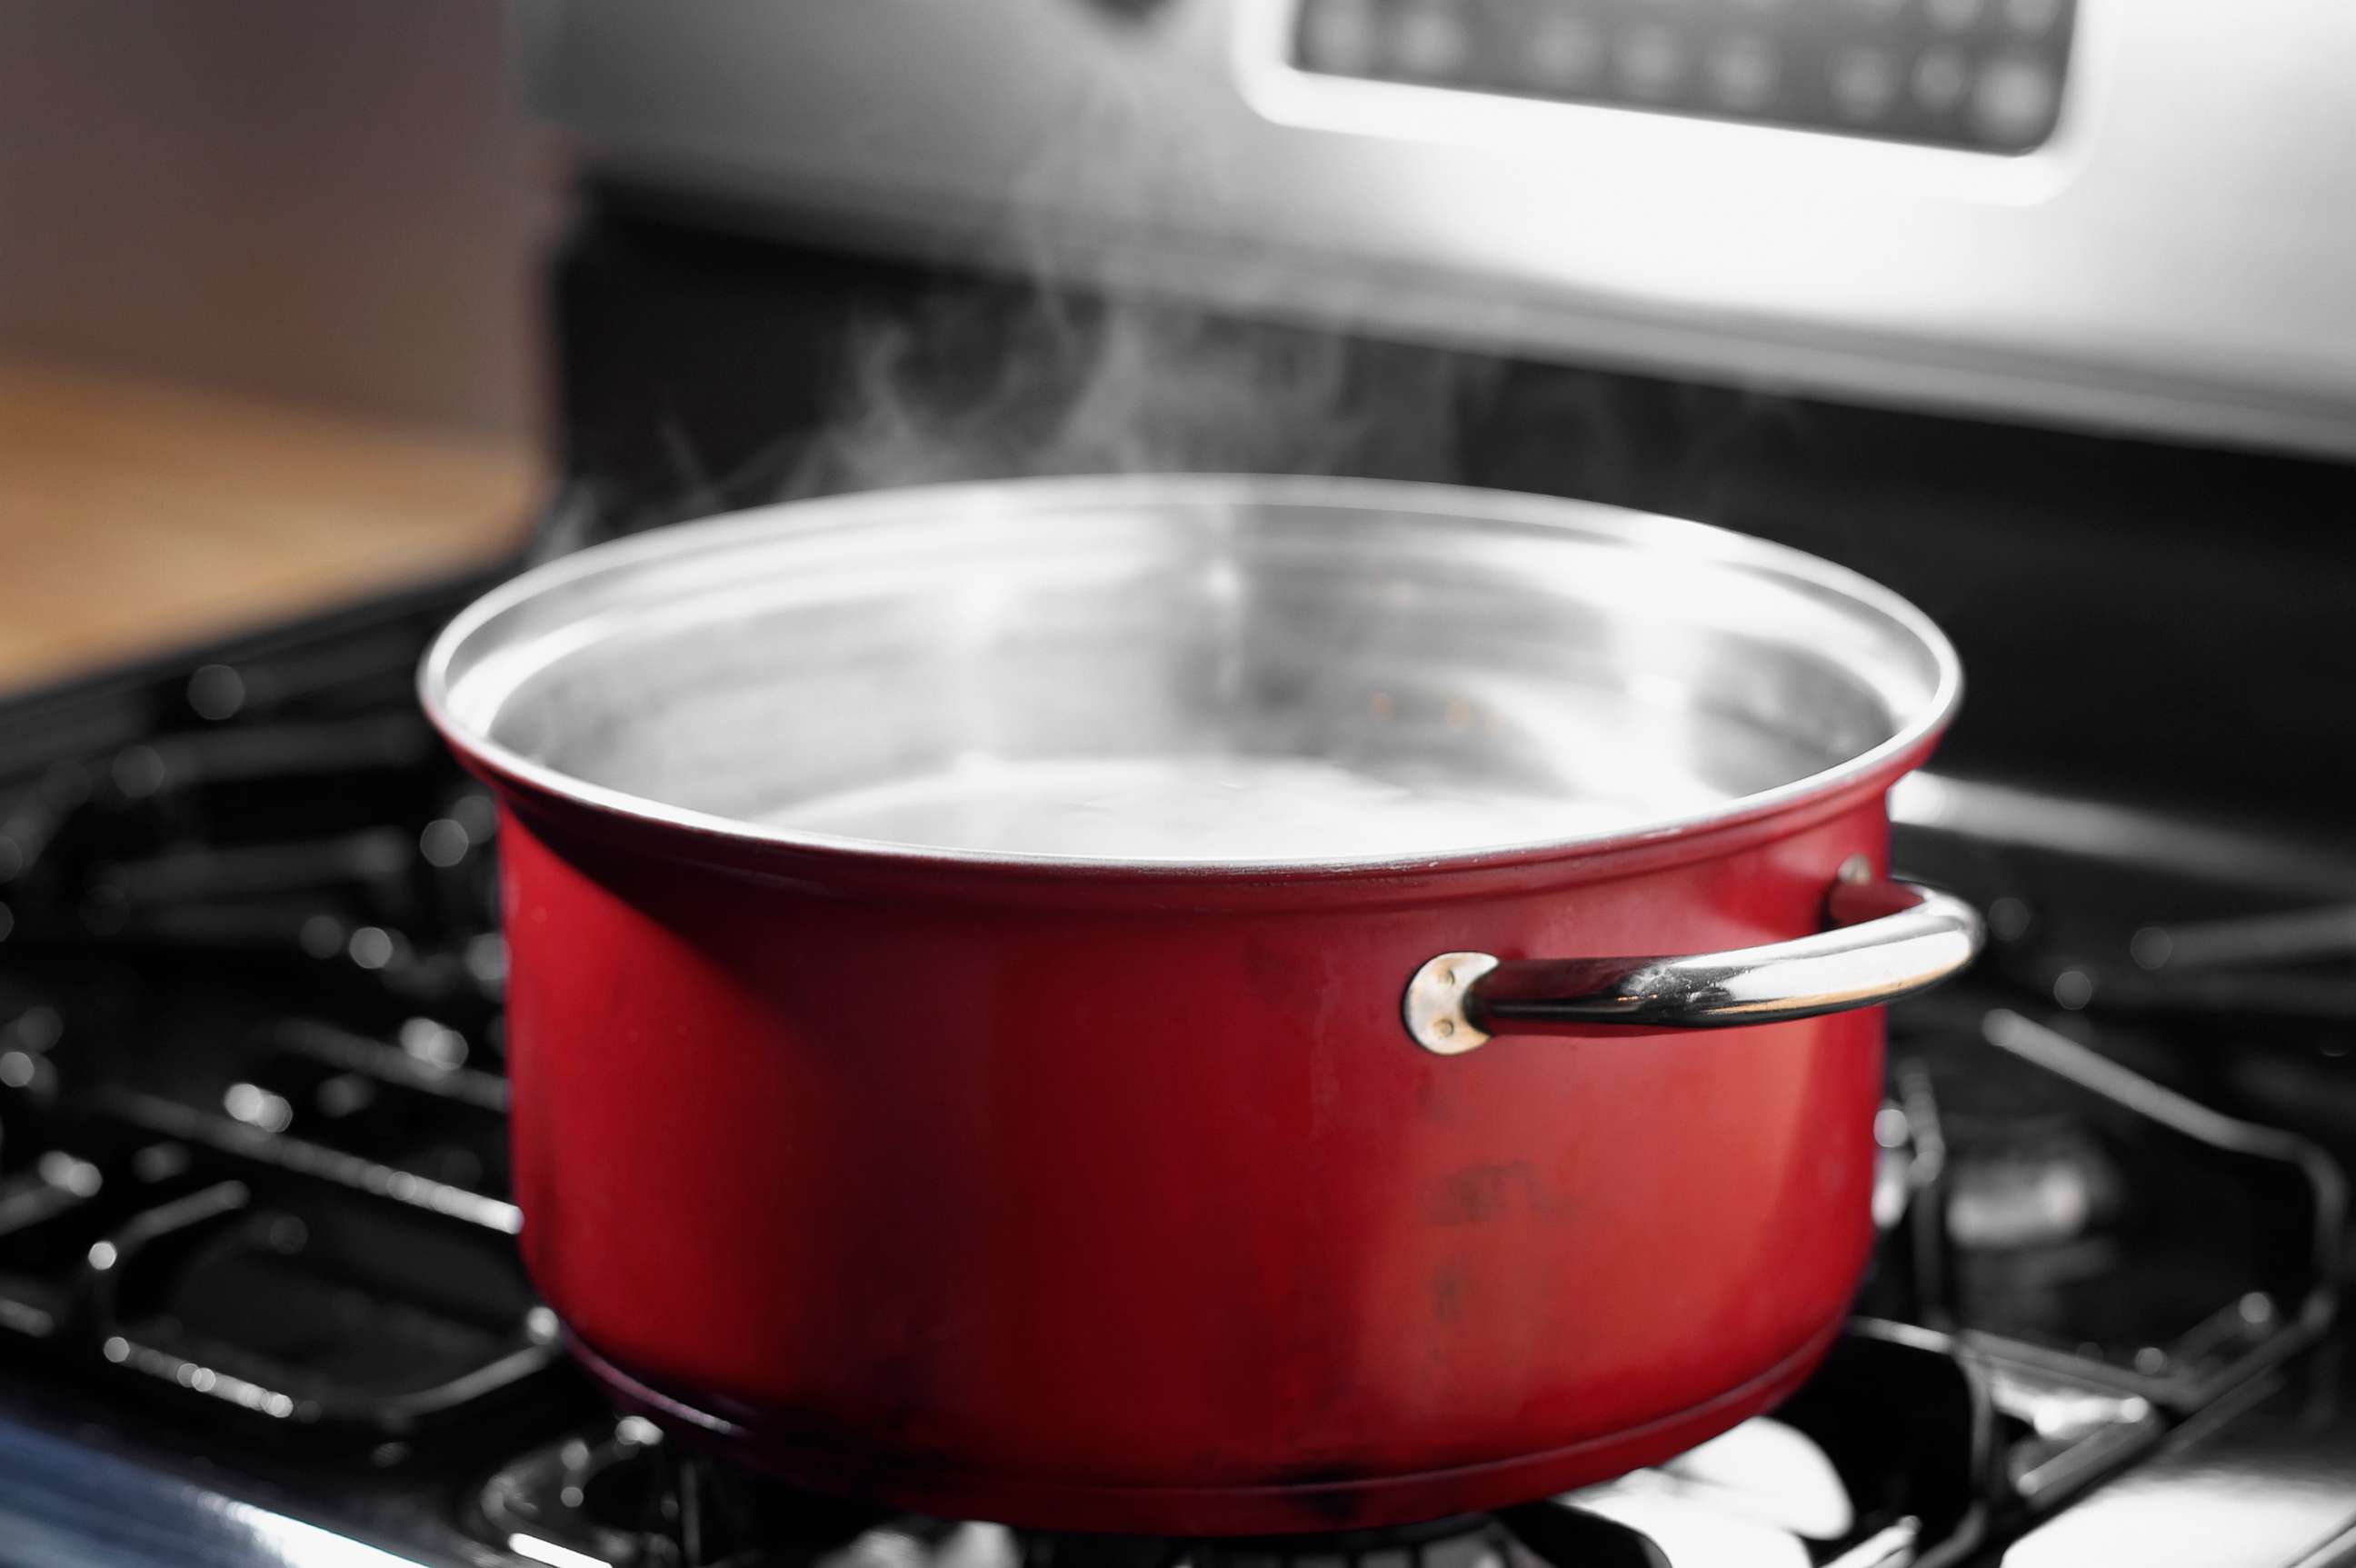 PHOTO: A pot of boiling water on a stove is seen in a stock photo.